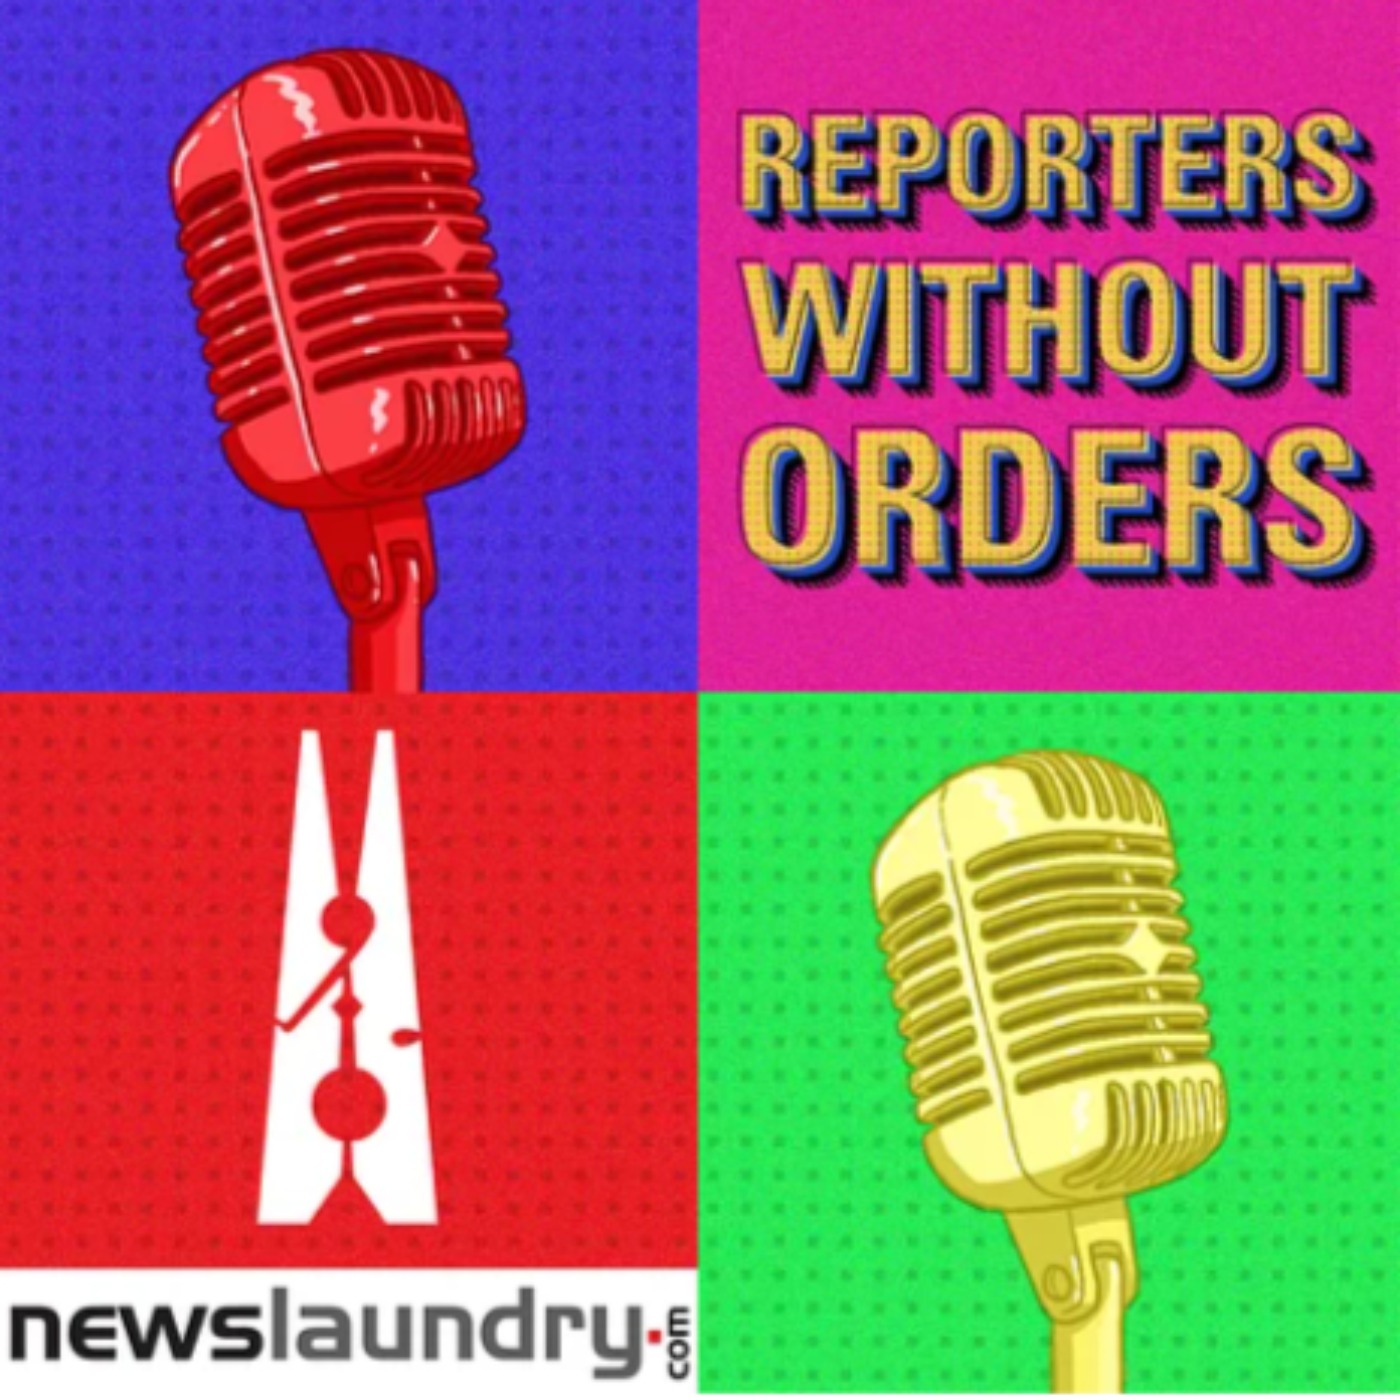 Reporters Without Orders Ep 171: Ramdev and his ayurveda claims